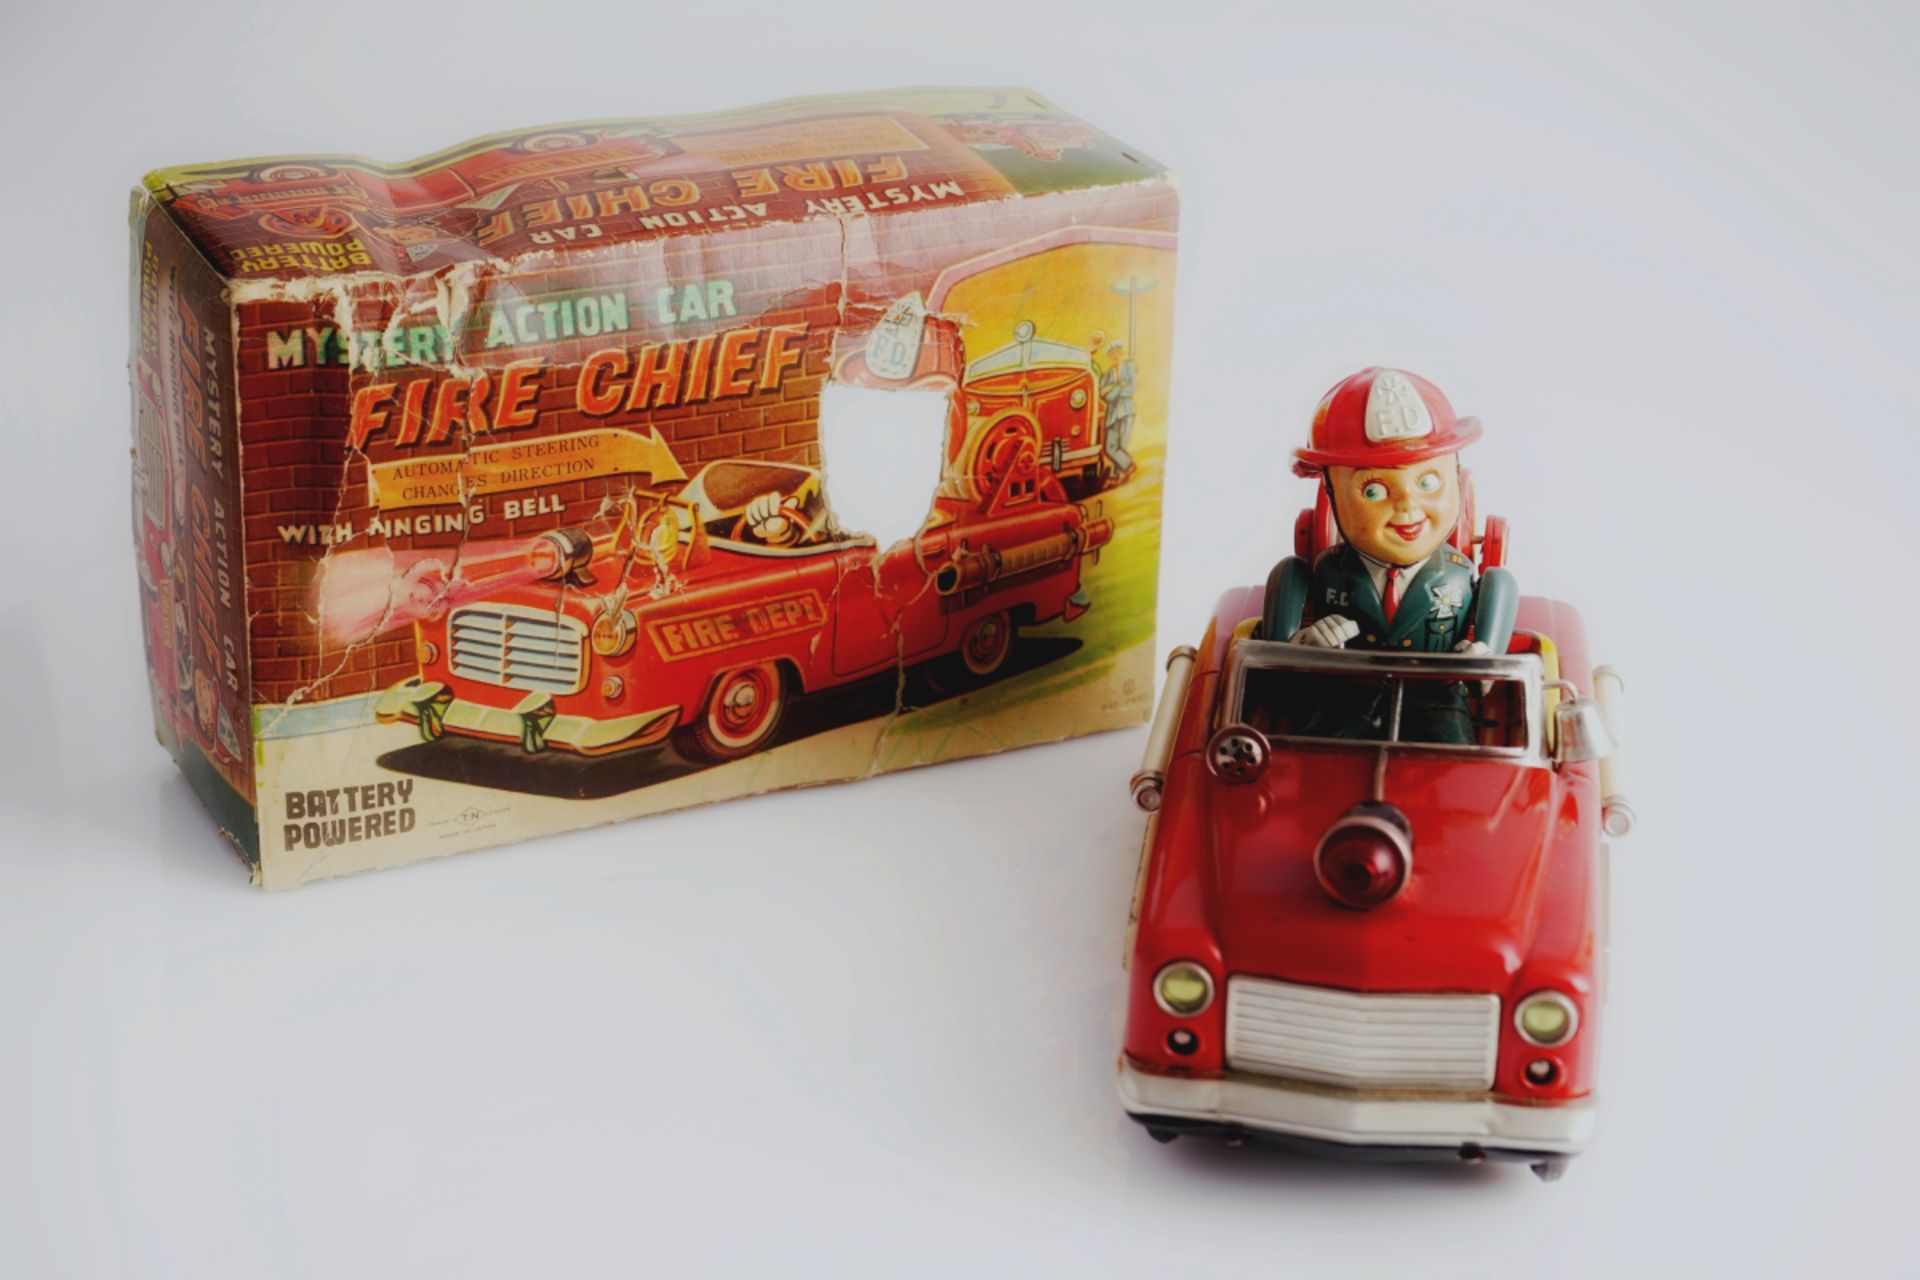 MYSTERY ACTION CAR, FIRE CHIEF, Japan 1950/60